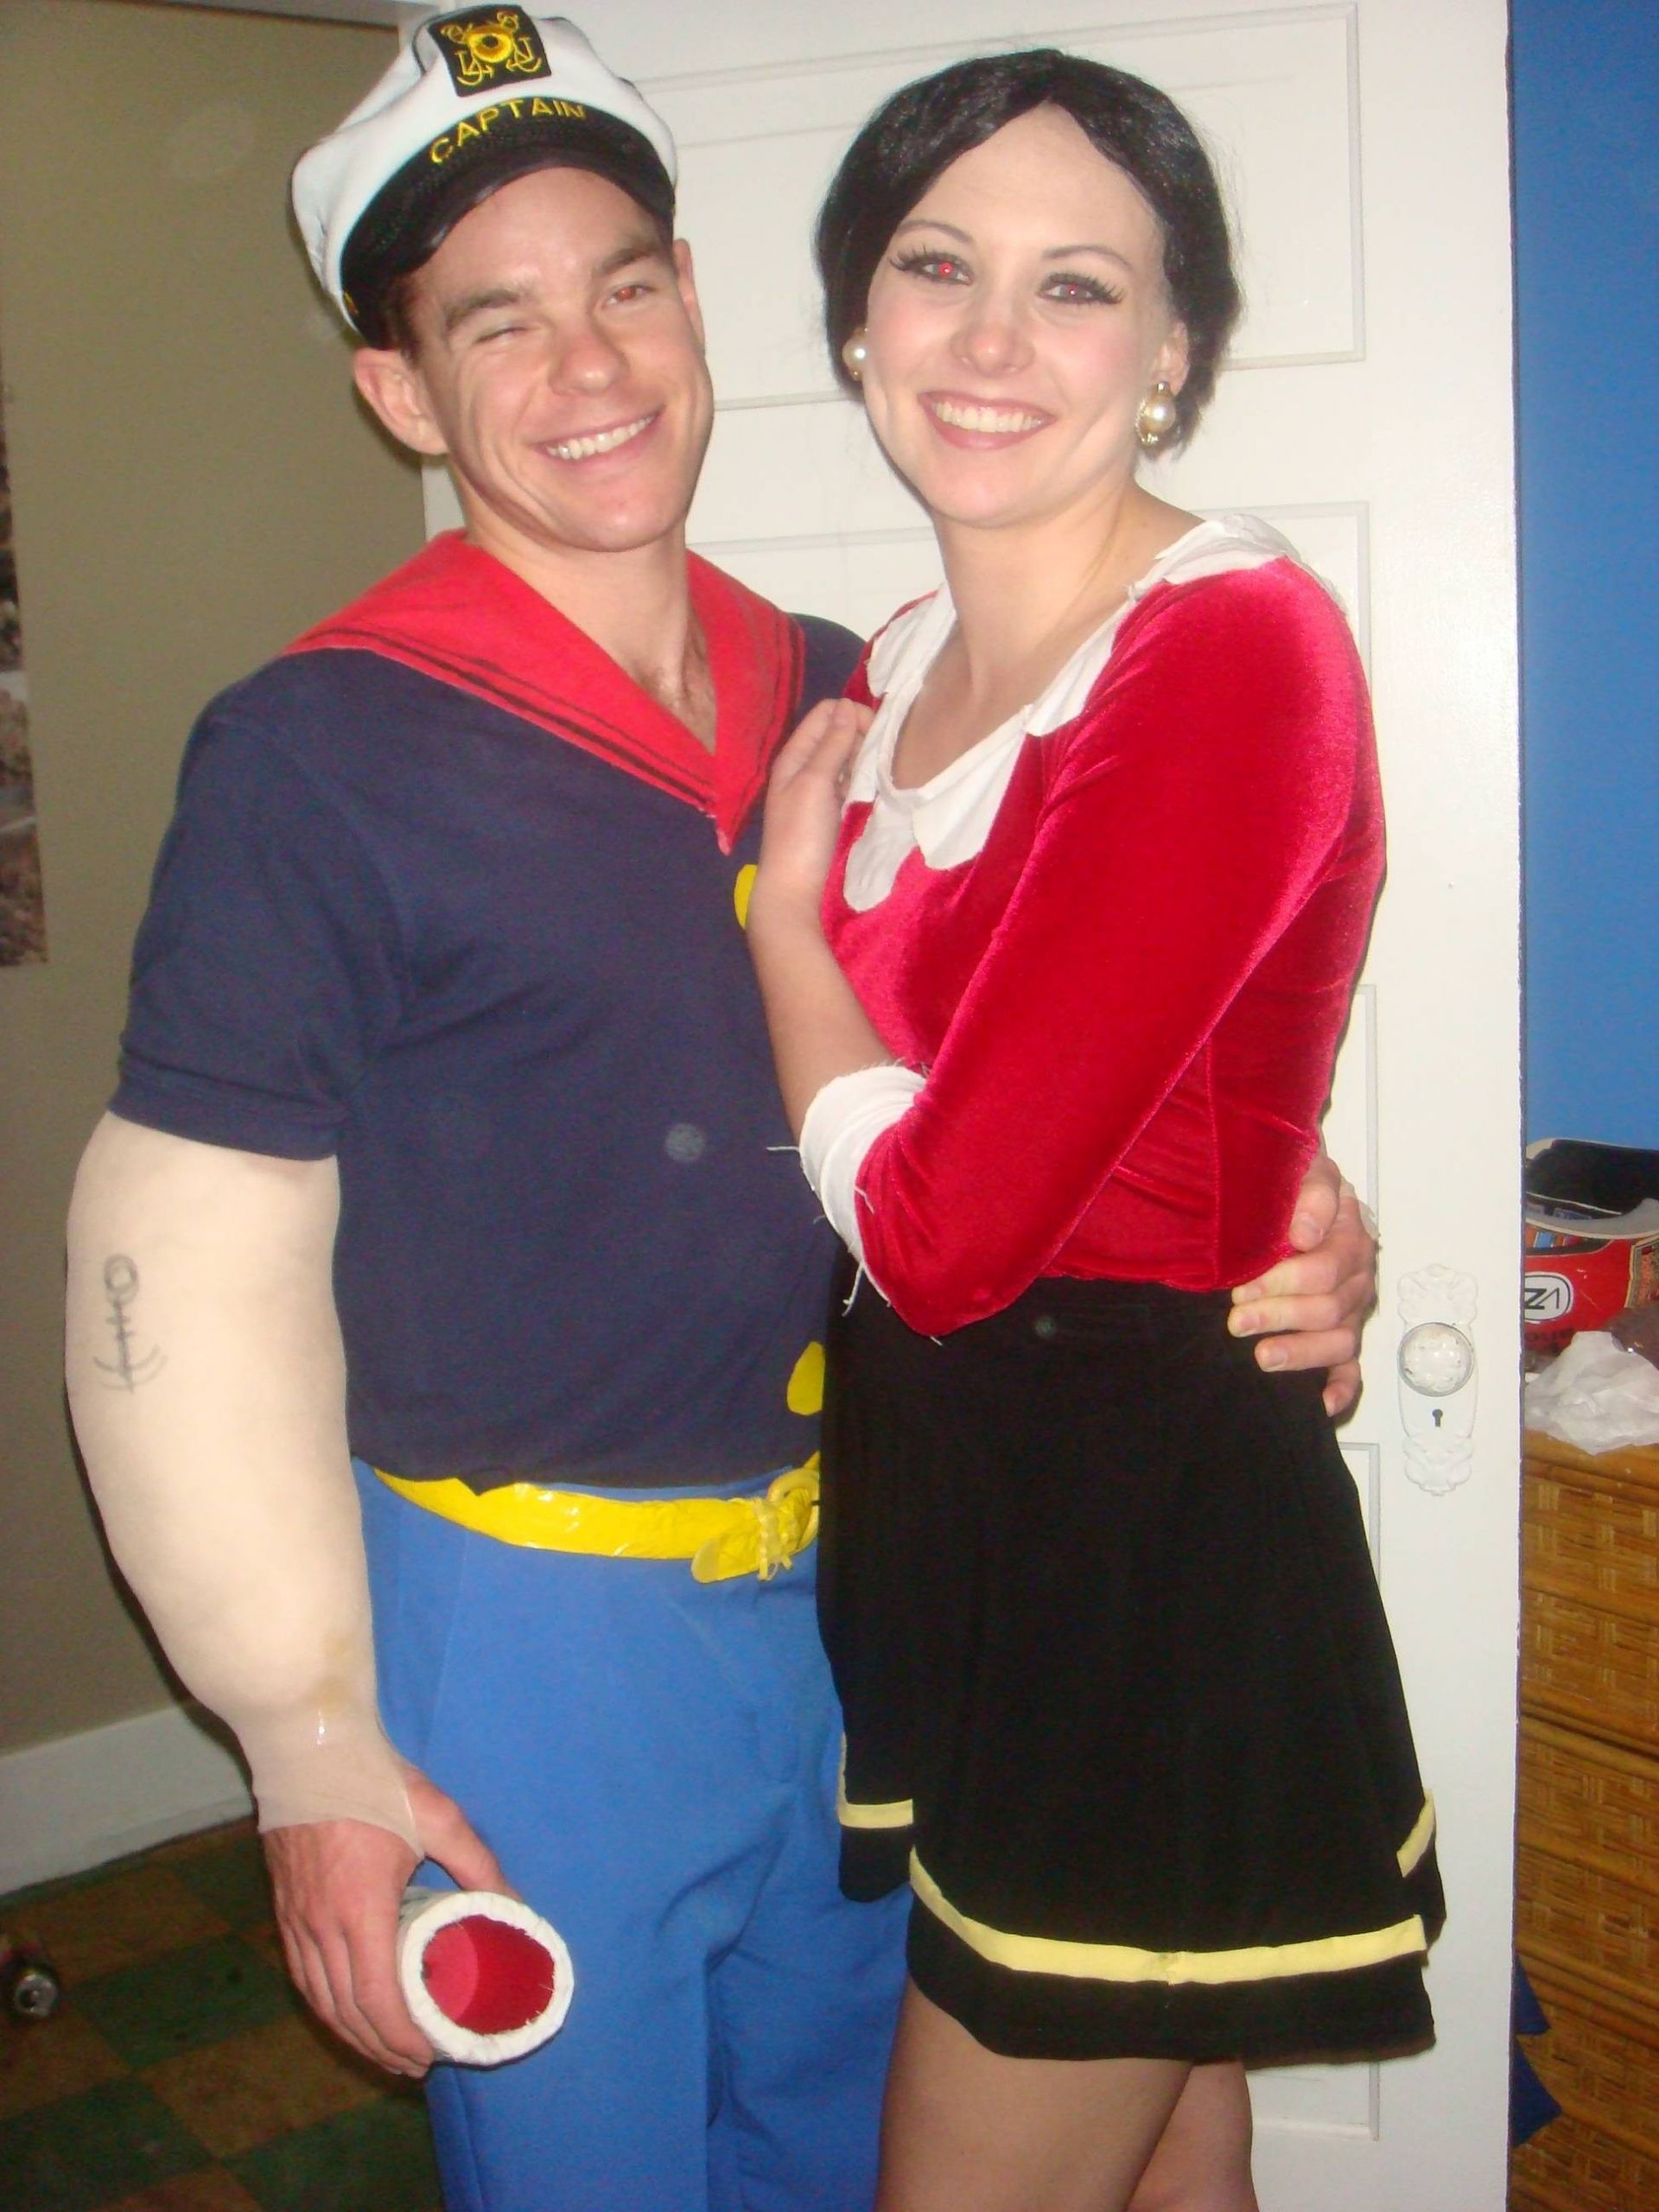 The 35 Best Ideas for Diy Popeye and Olive Oyl Costume - Home, Family ...